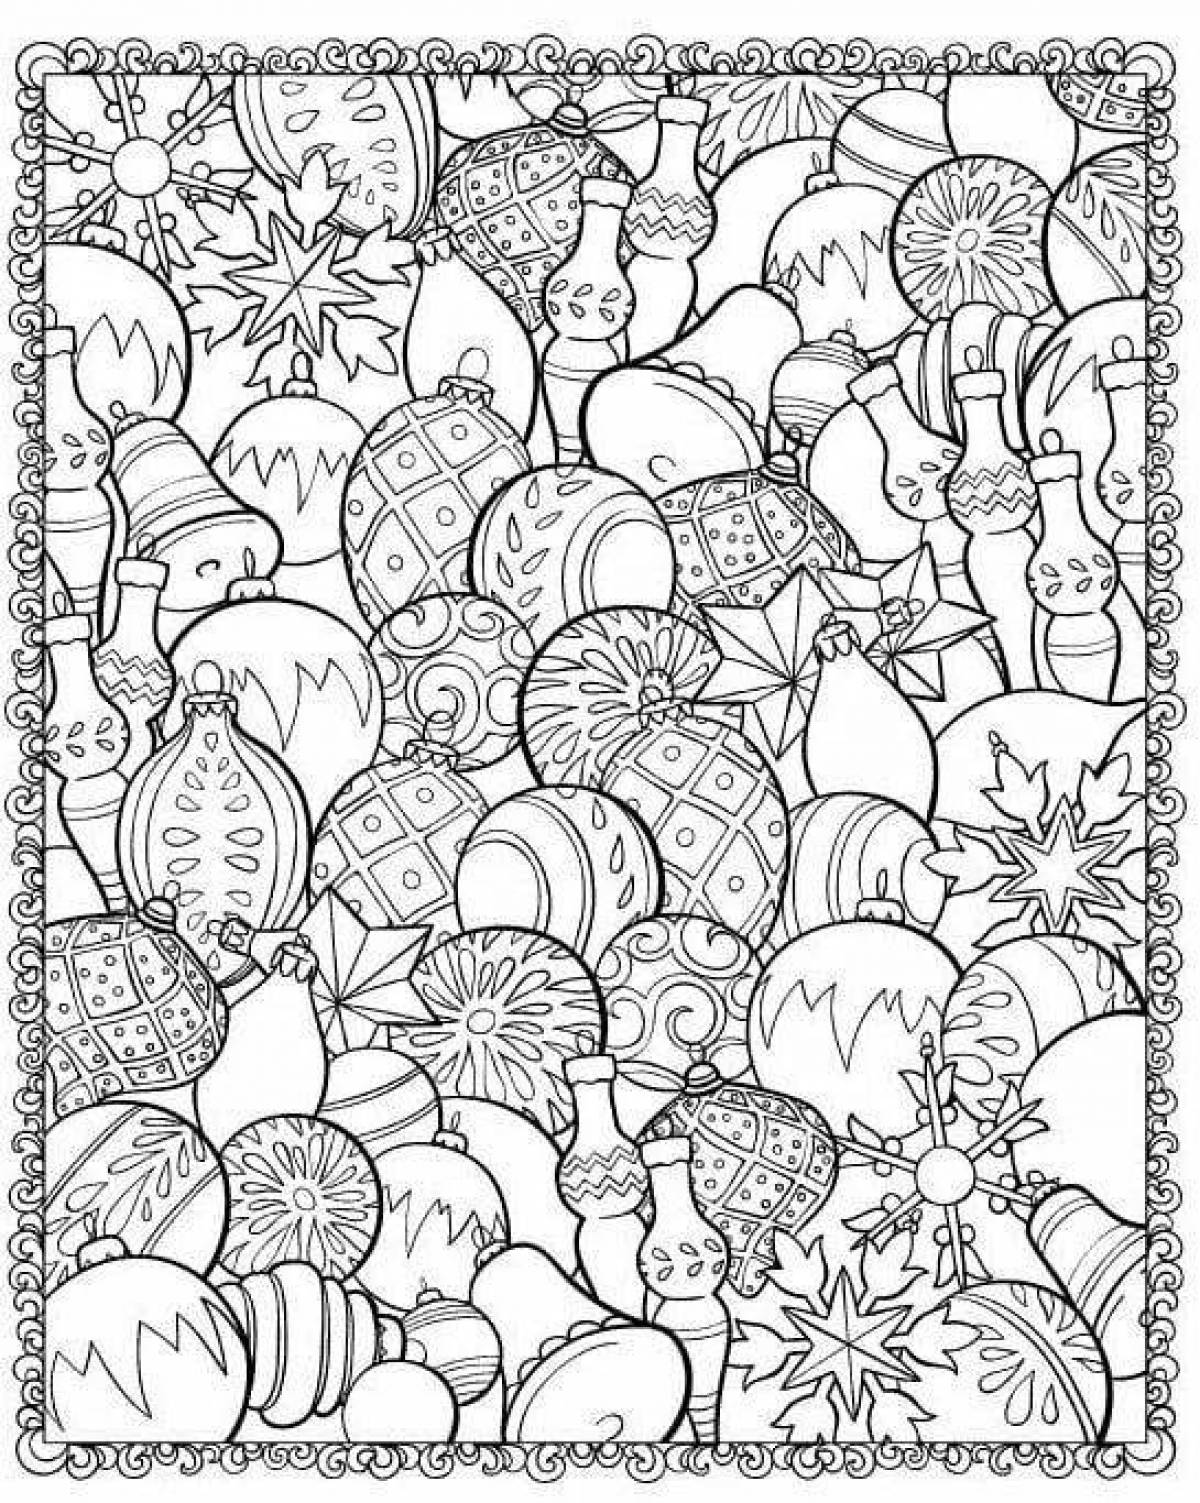 Elegant Christmas coloring book for adults